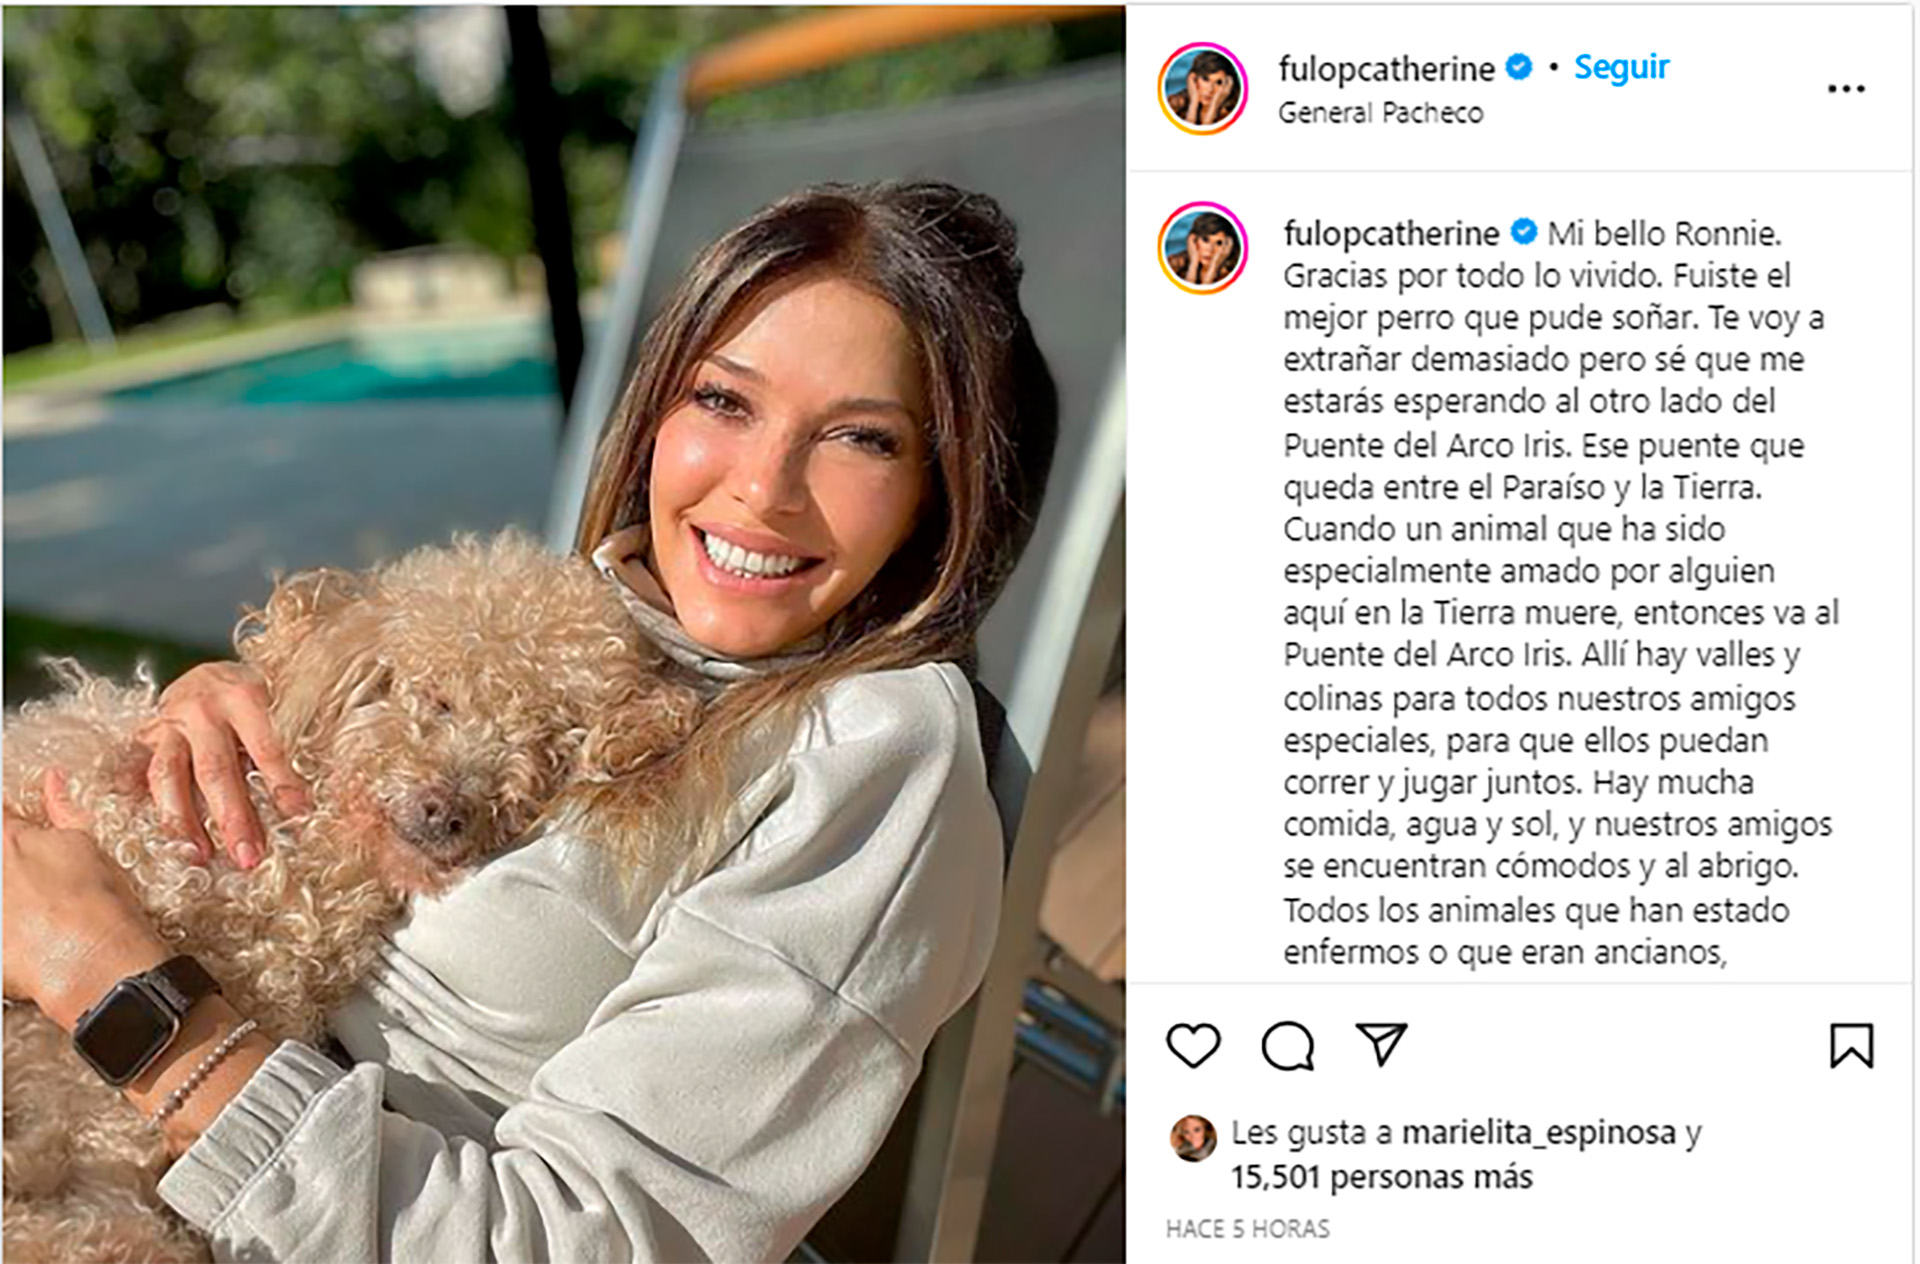 The post Catherine Fulop shared on her networks to fire Ronnie, her dog (Photo: Instagram)